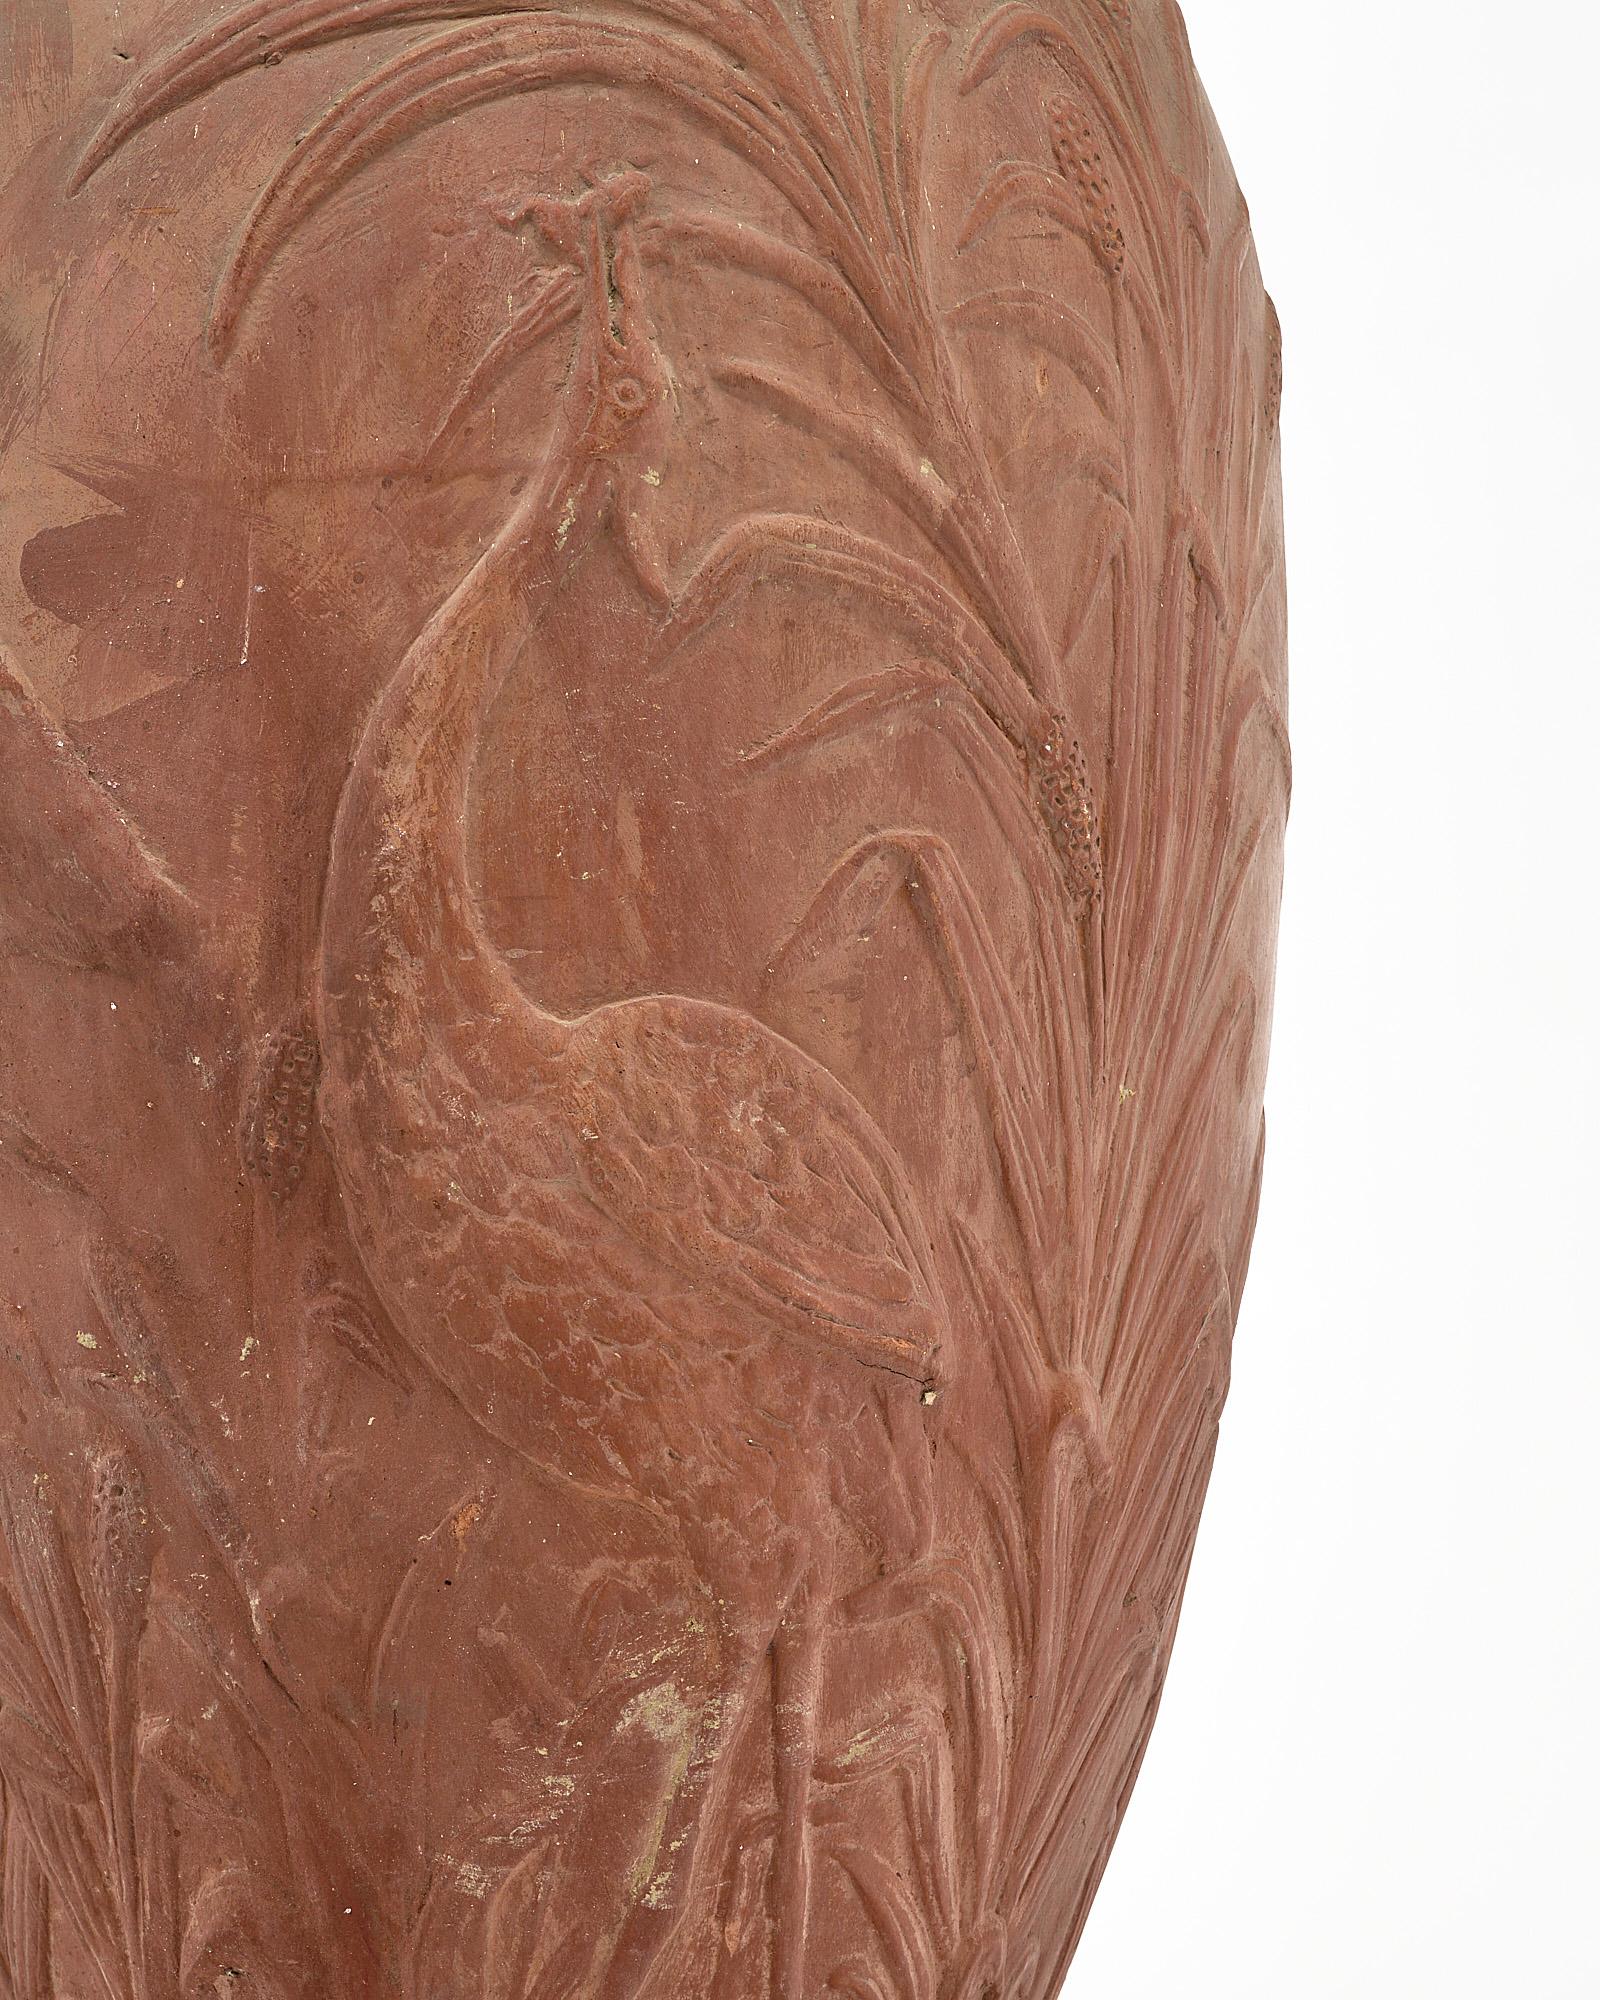 French Art Deco Terra Cotta Vase in the Manner of Jean Dunand For Sale